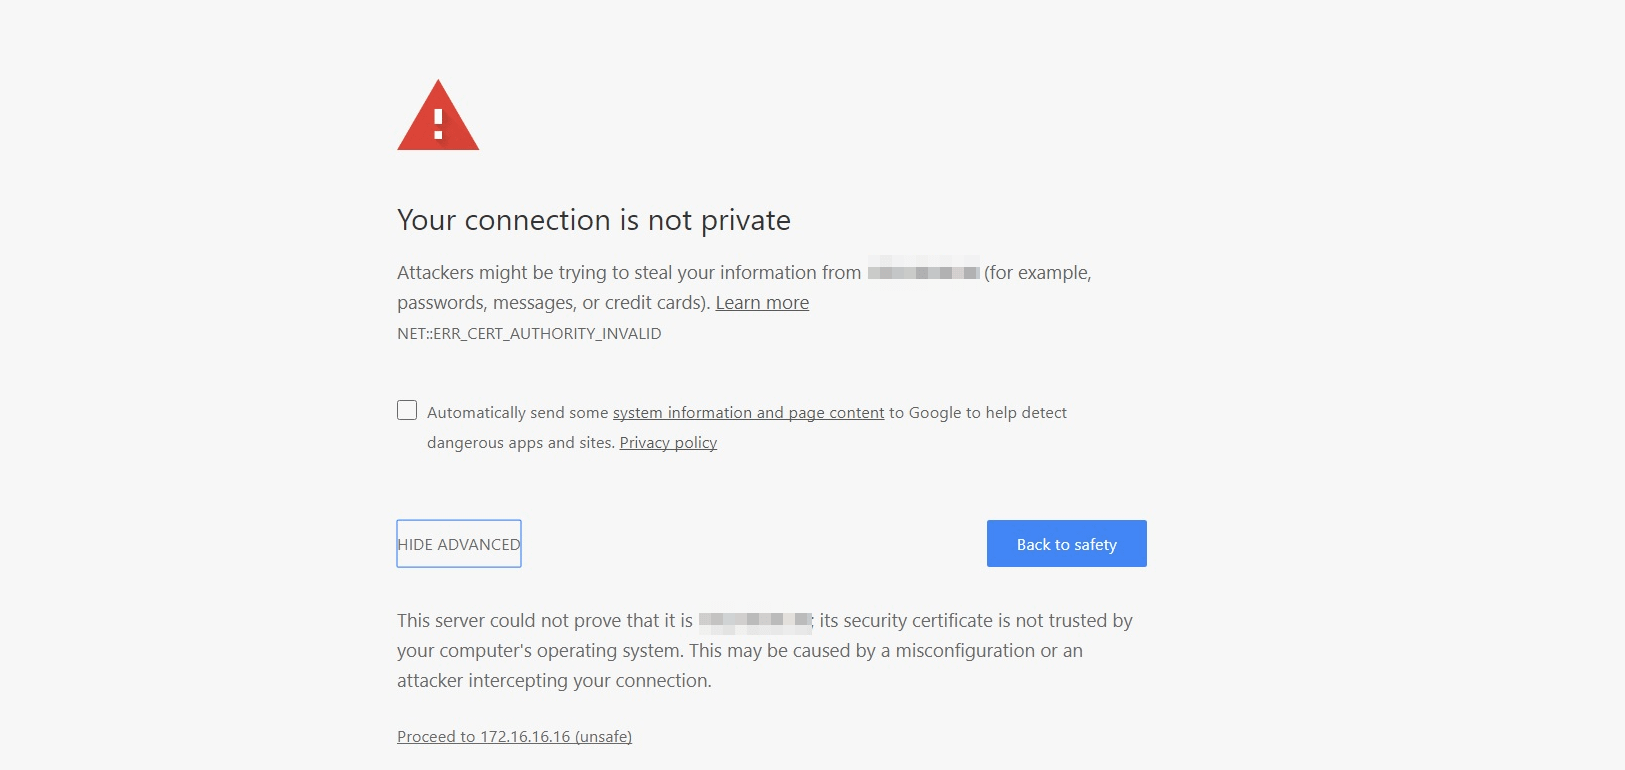 A certificate not trusted error is one of the most common SSL certificate errors